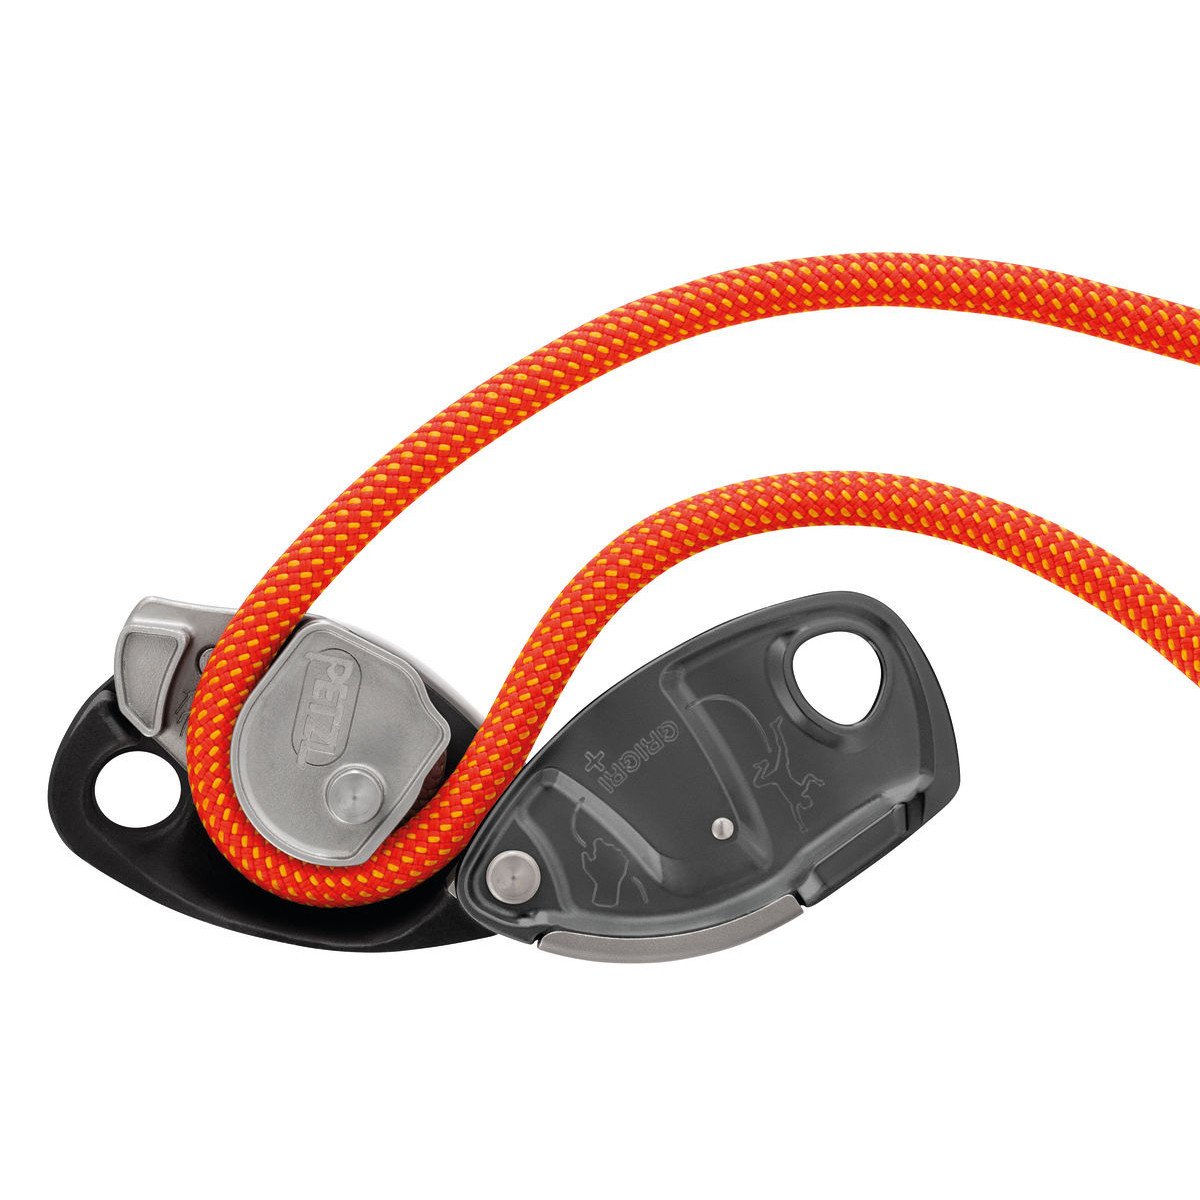 Petzl Grigri + belay device, showing open in use open with orange coloured rope